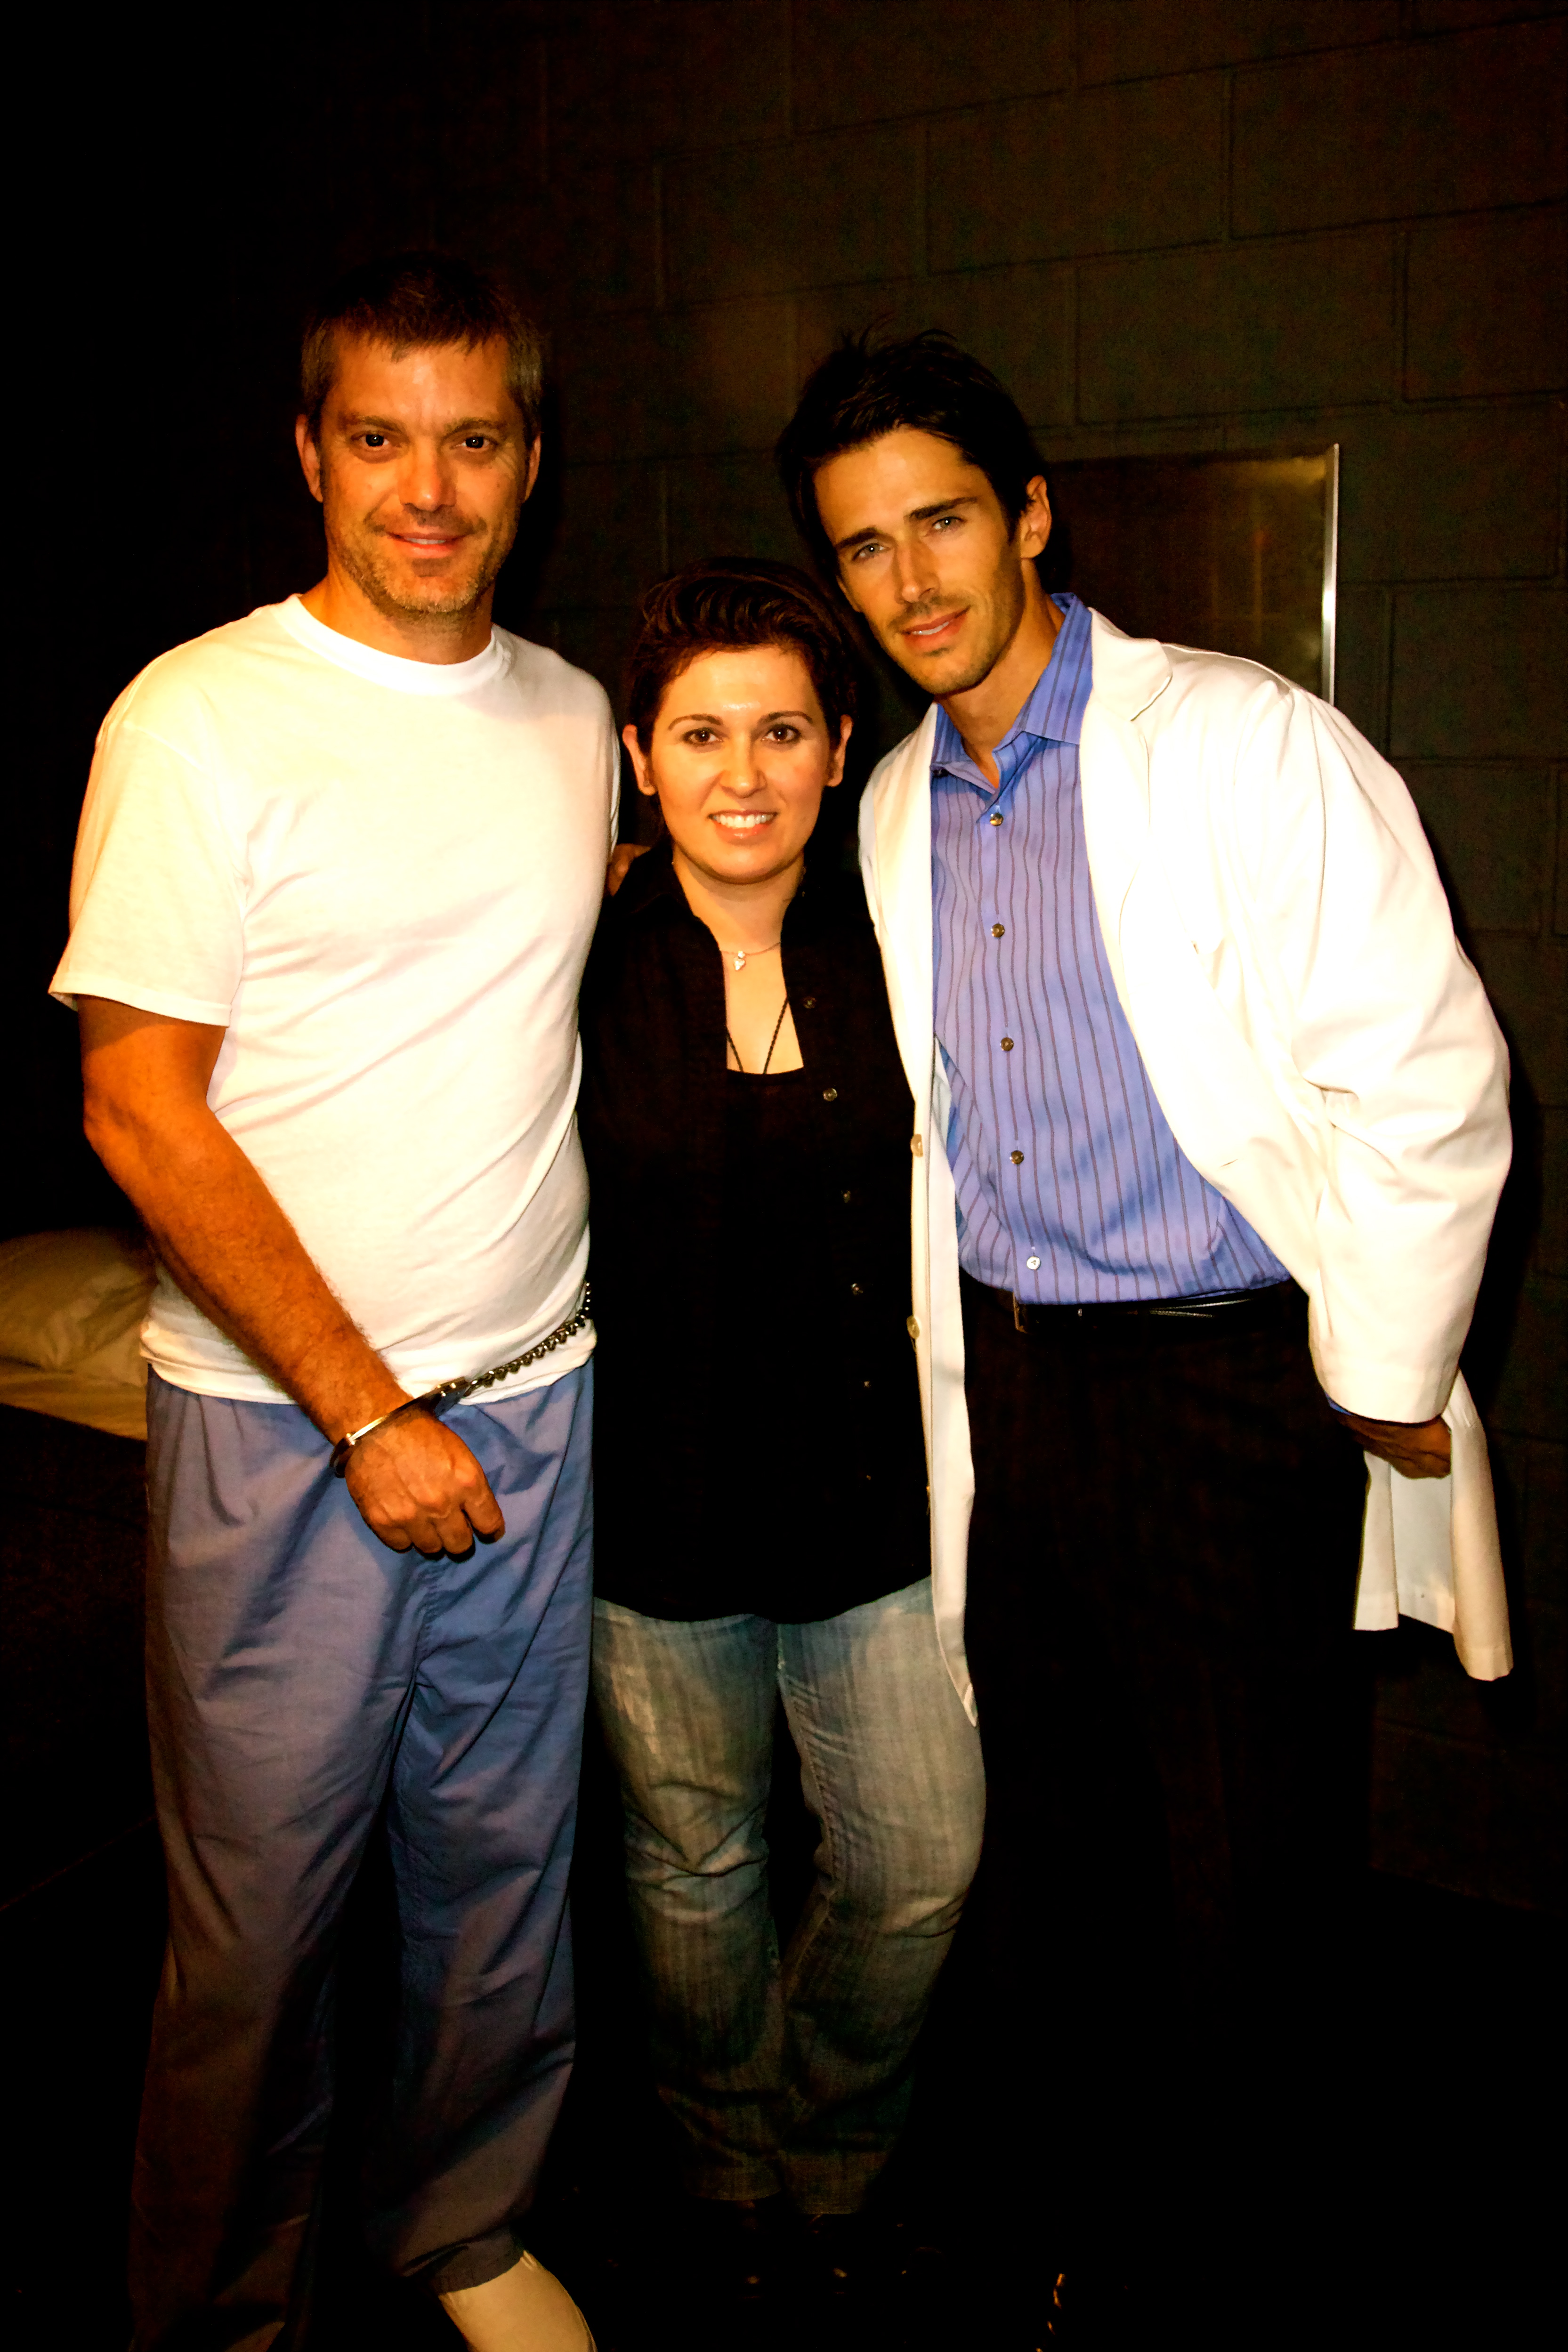 Farnaz, Brandon Beemer, and Gil Darnell on the set of BLOOD MOON, 2011.